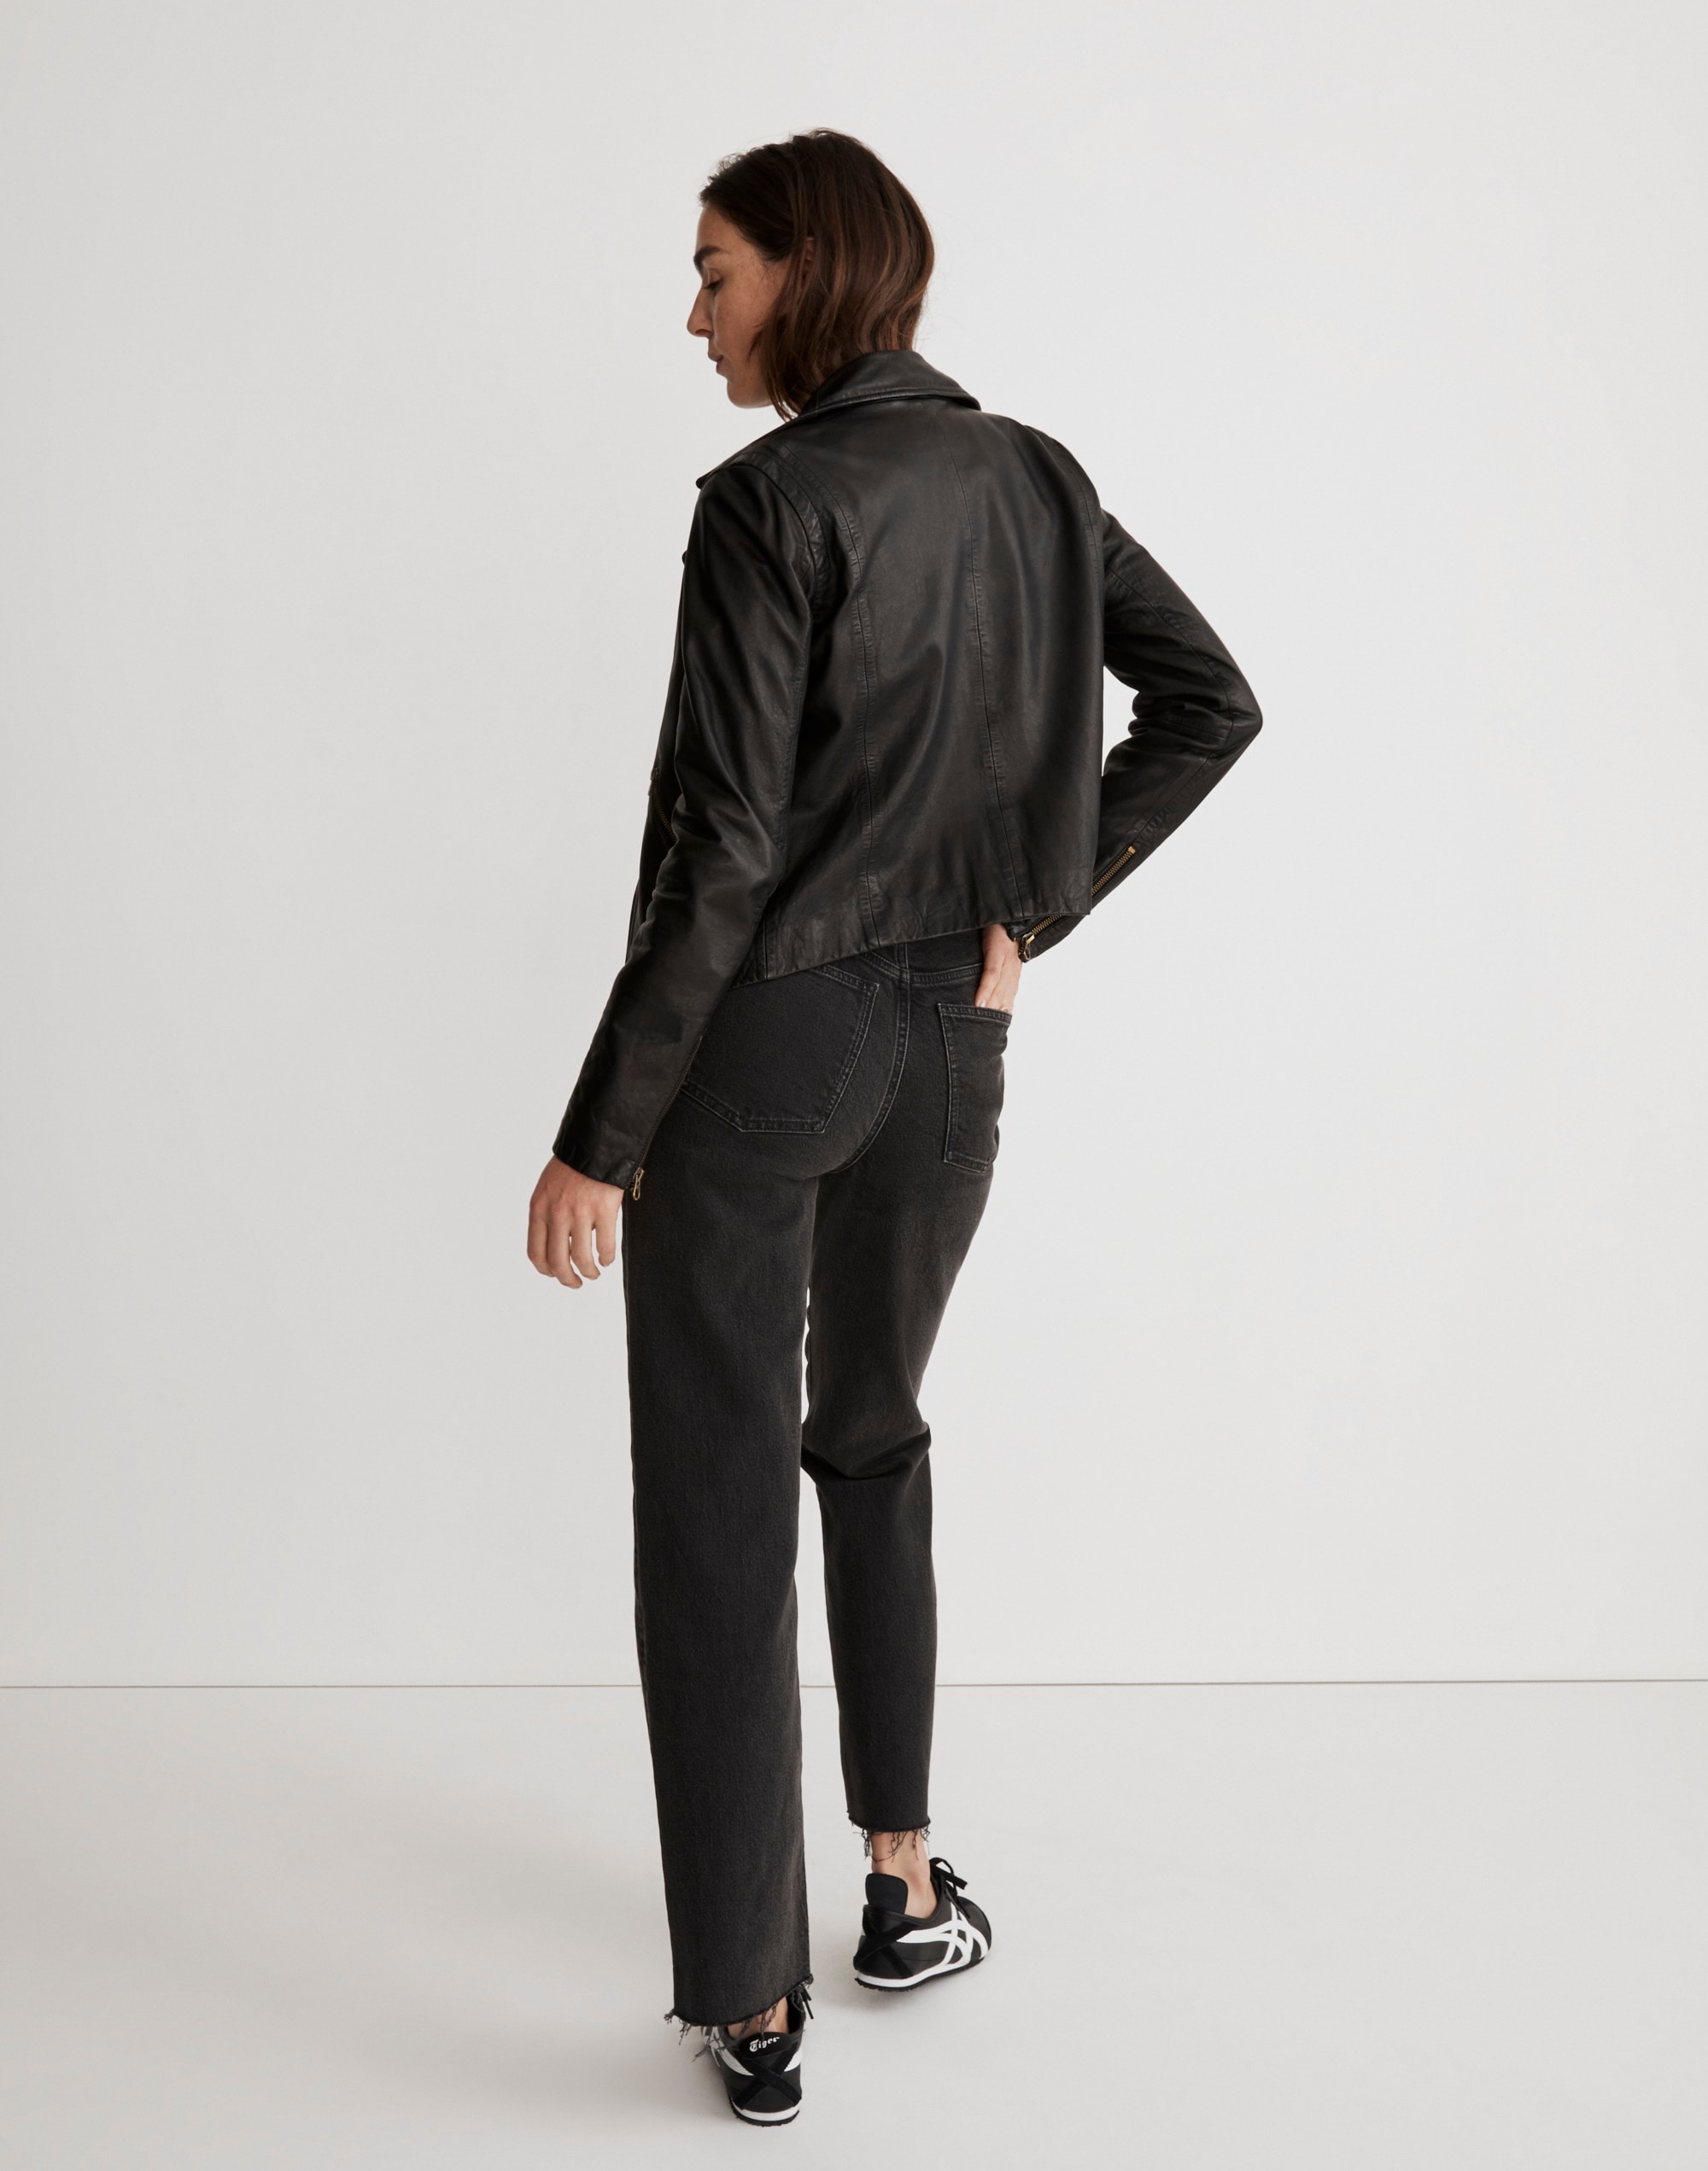 Looks Good from the Back: Review: Madewell Washed Leather Jacket.